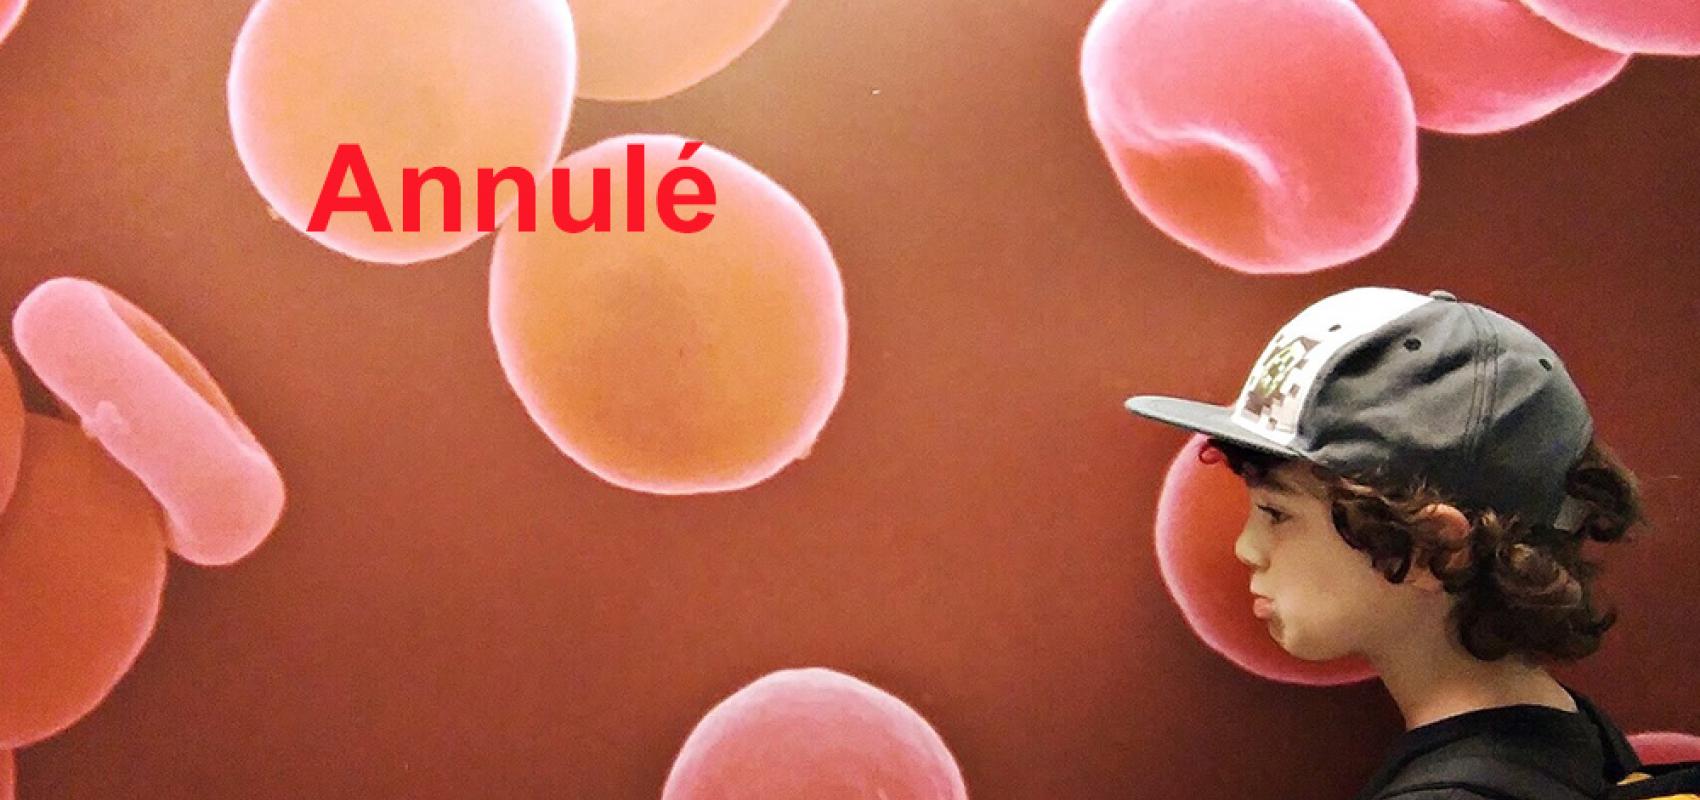 Red blood cells / Globules rouges -  - BnF